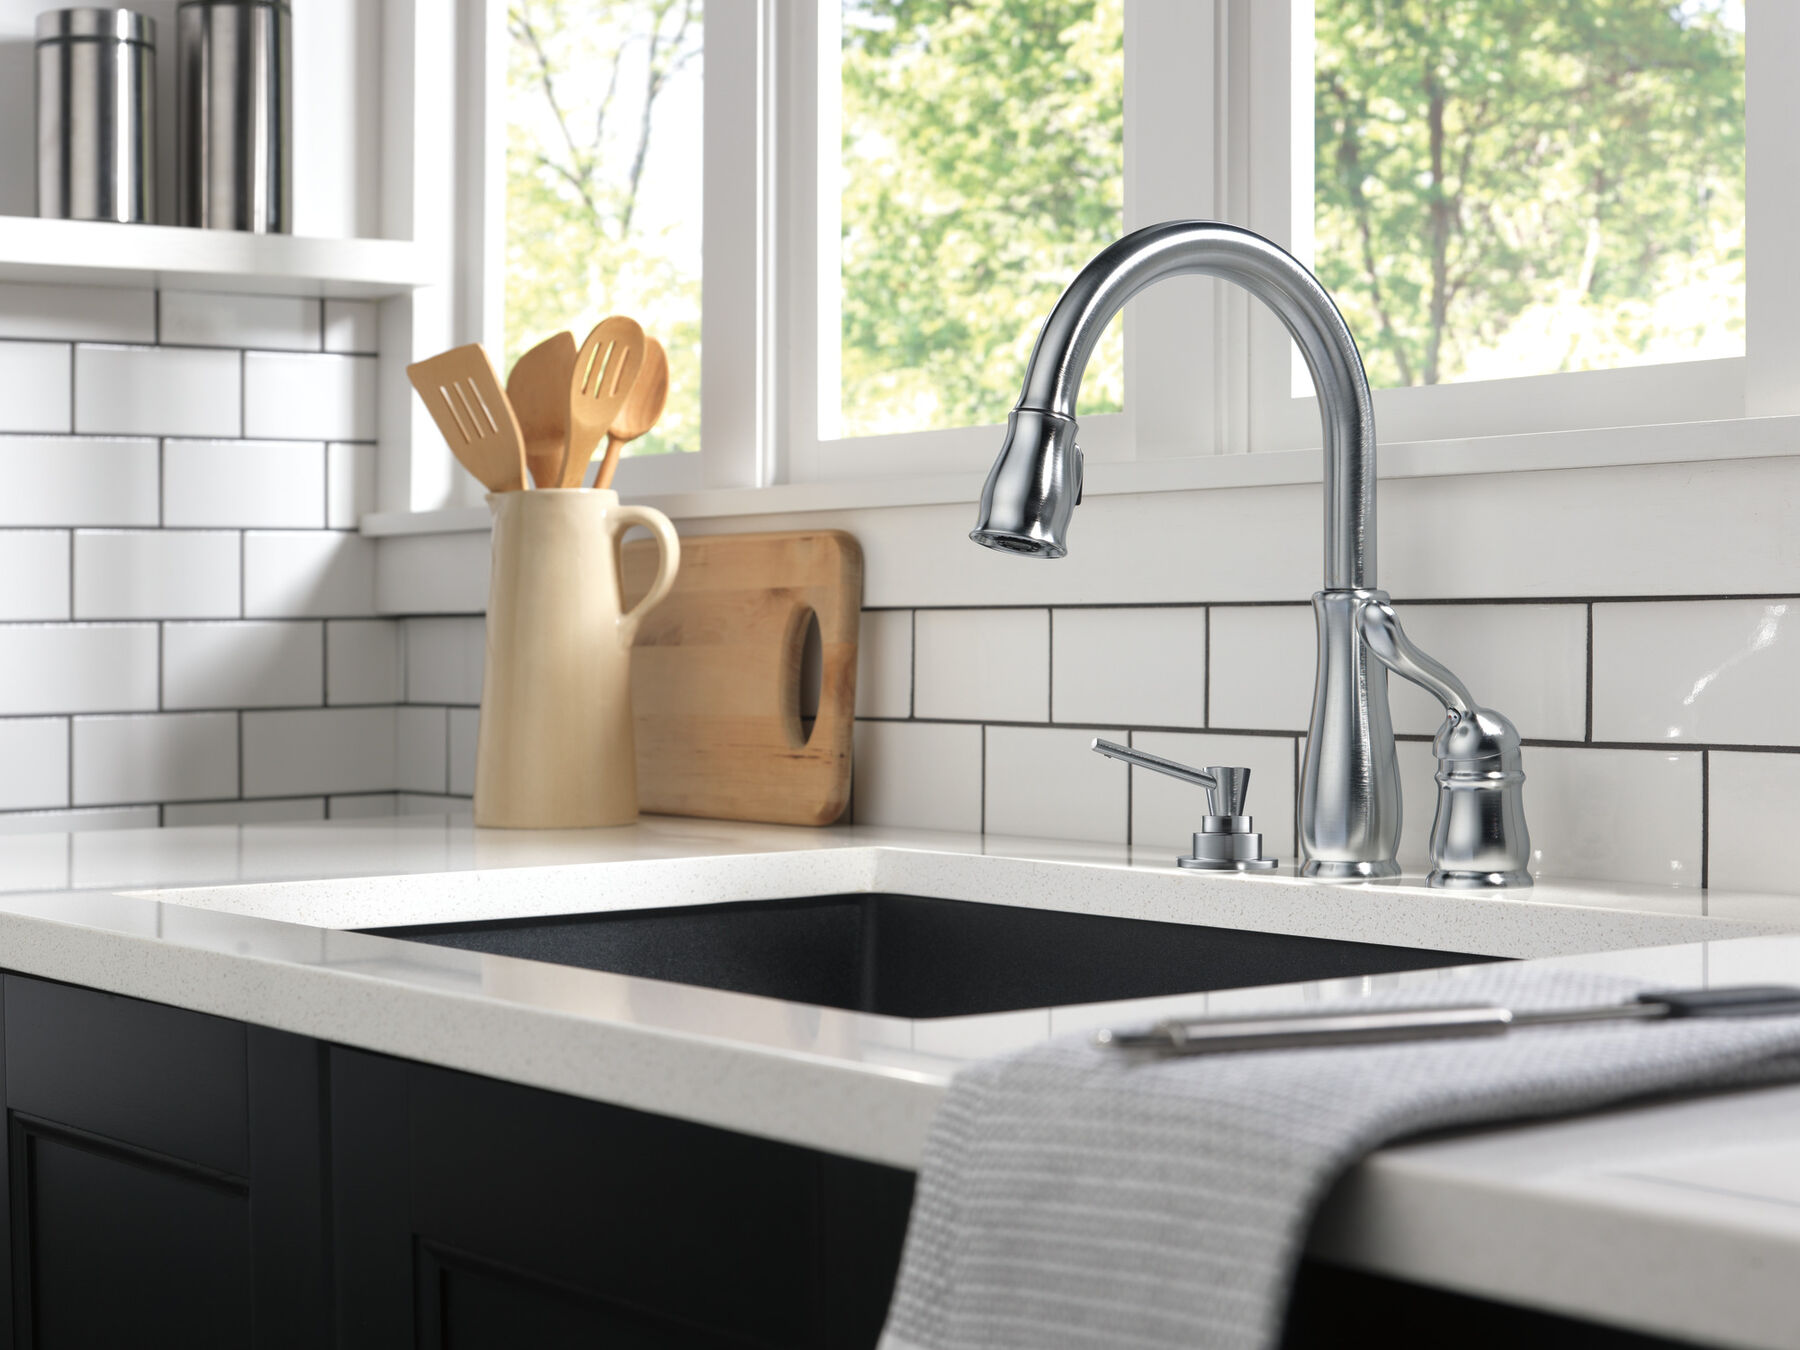 The Plumber's Choice Kitchen Sink Stainless Steel Soap Dispenser Built-in Design for Counter Top with Large Liquid Bottle in Brushed Nickel